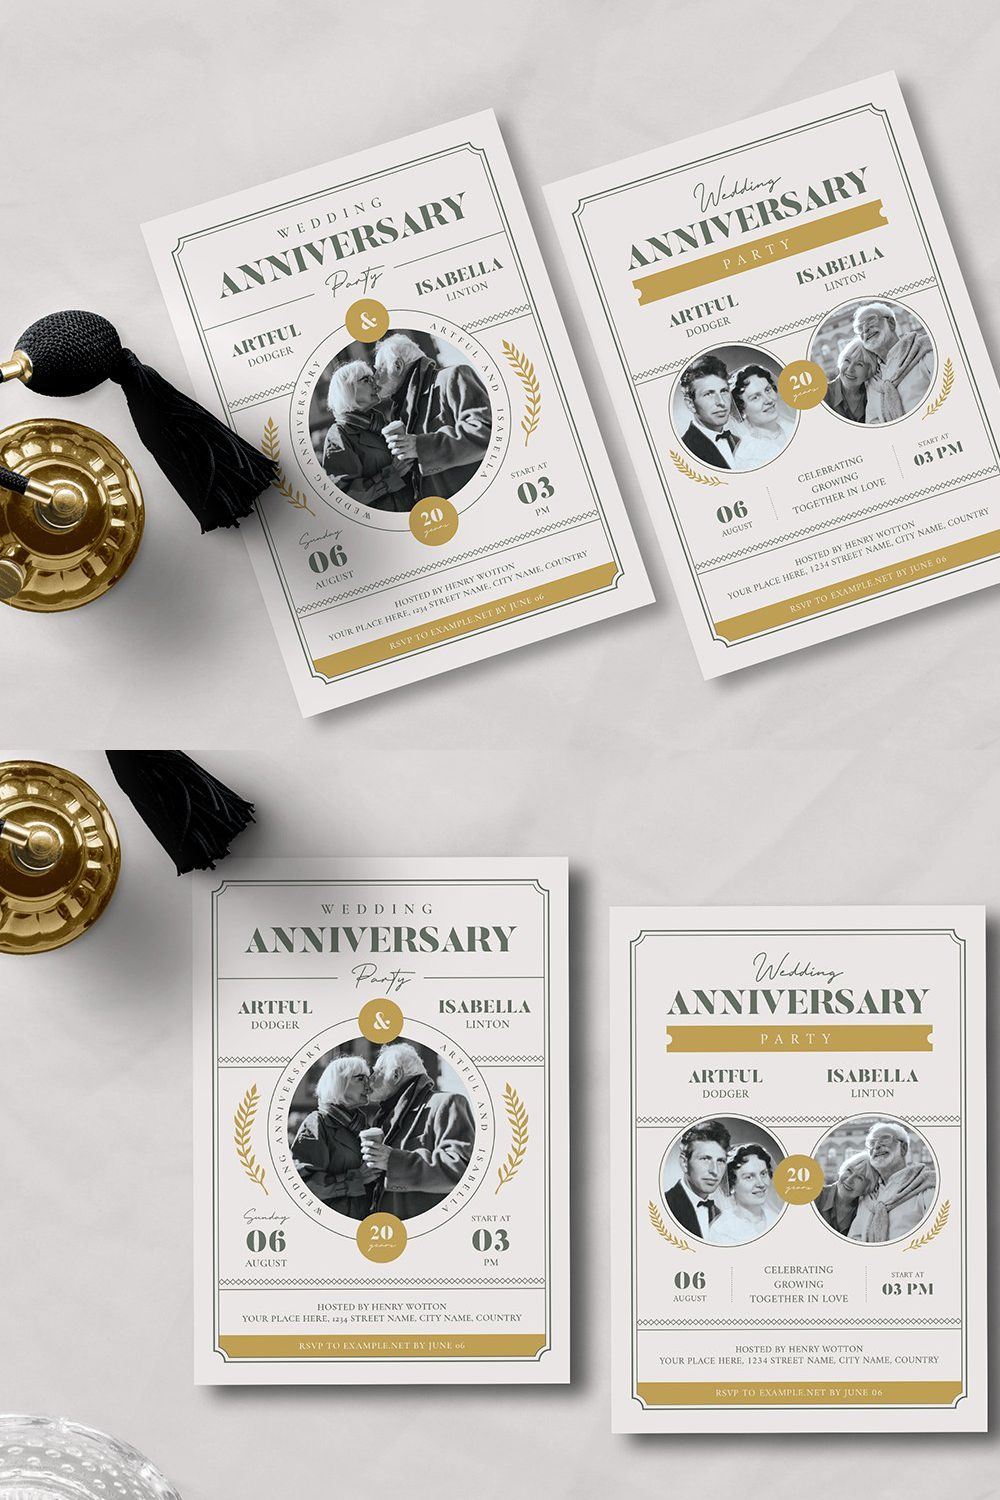 Wedding Anniversary Party Invitation pinterest preview image.